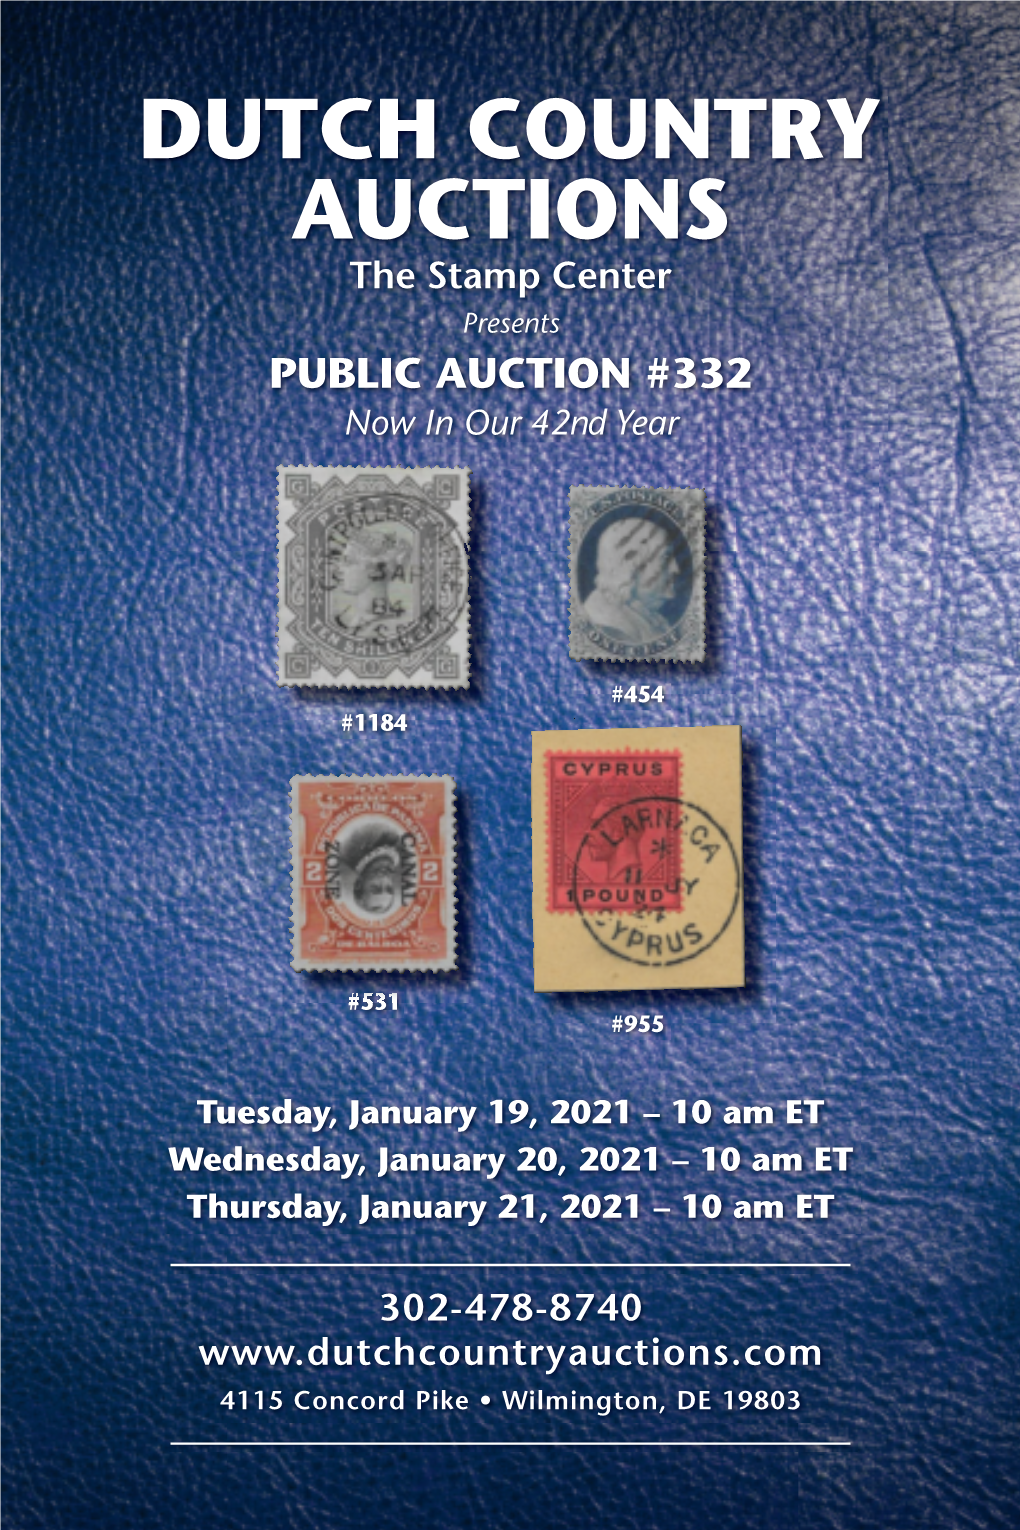 DUTCH COUNTRY AUCTIONS the Stamp Center Presents PUBLIC AUCTION #332 Now in Our 42Nd Year